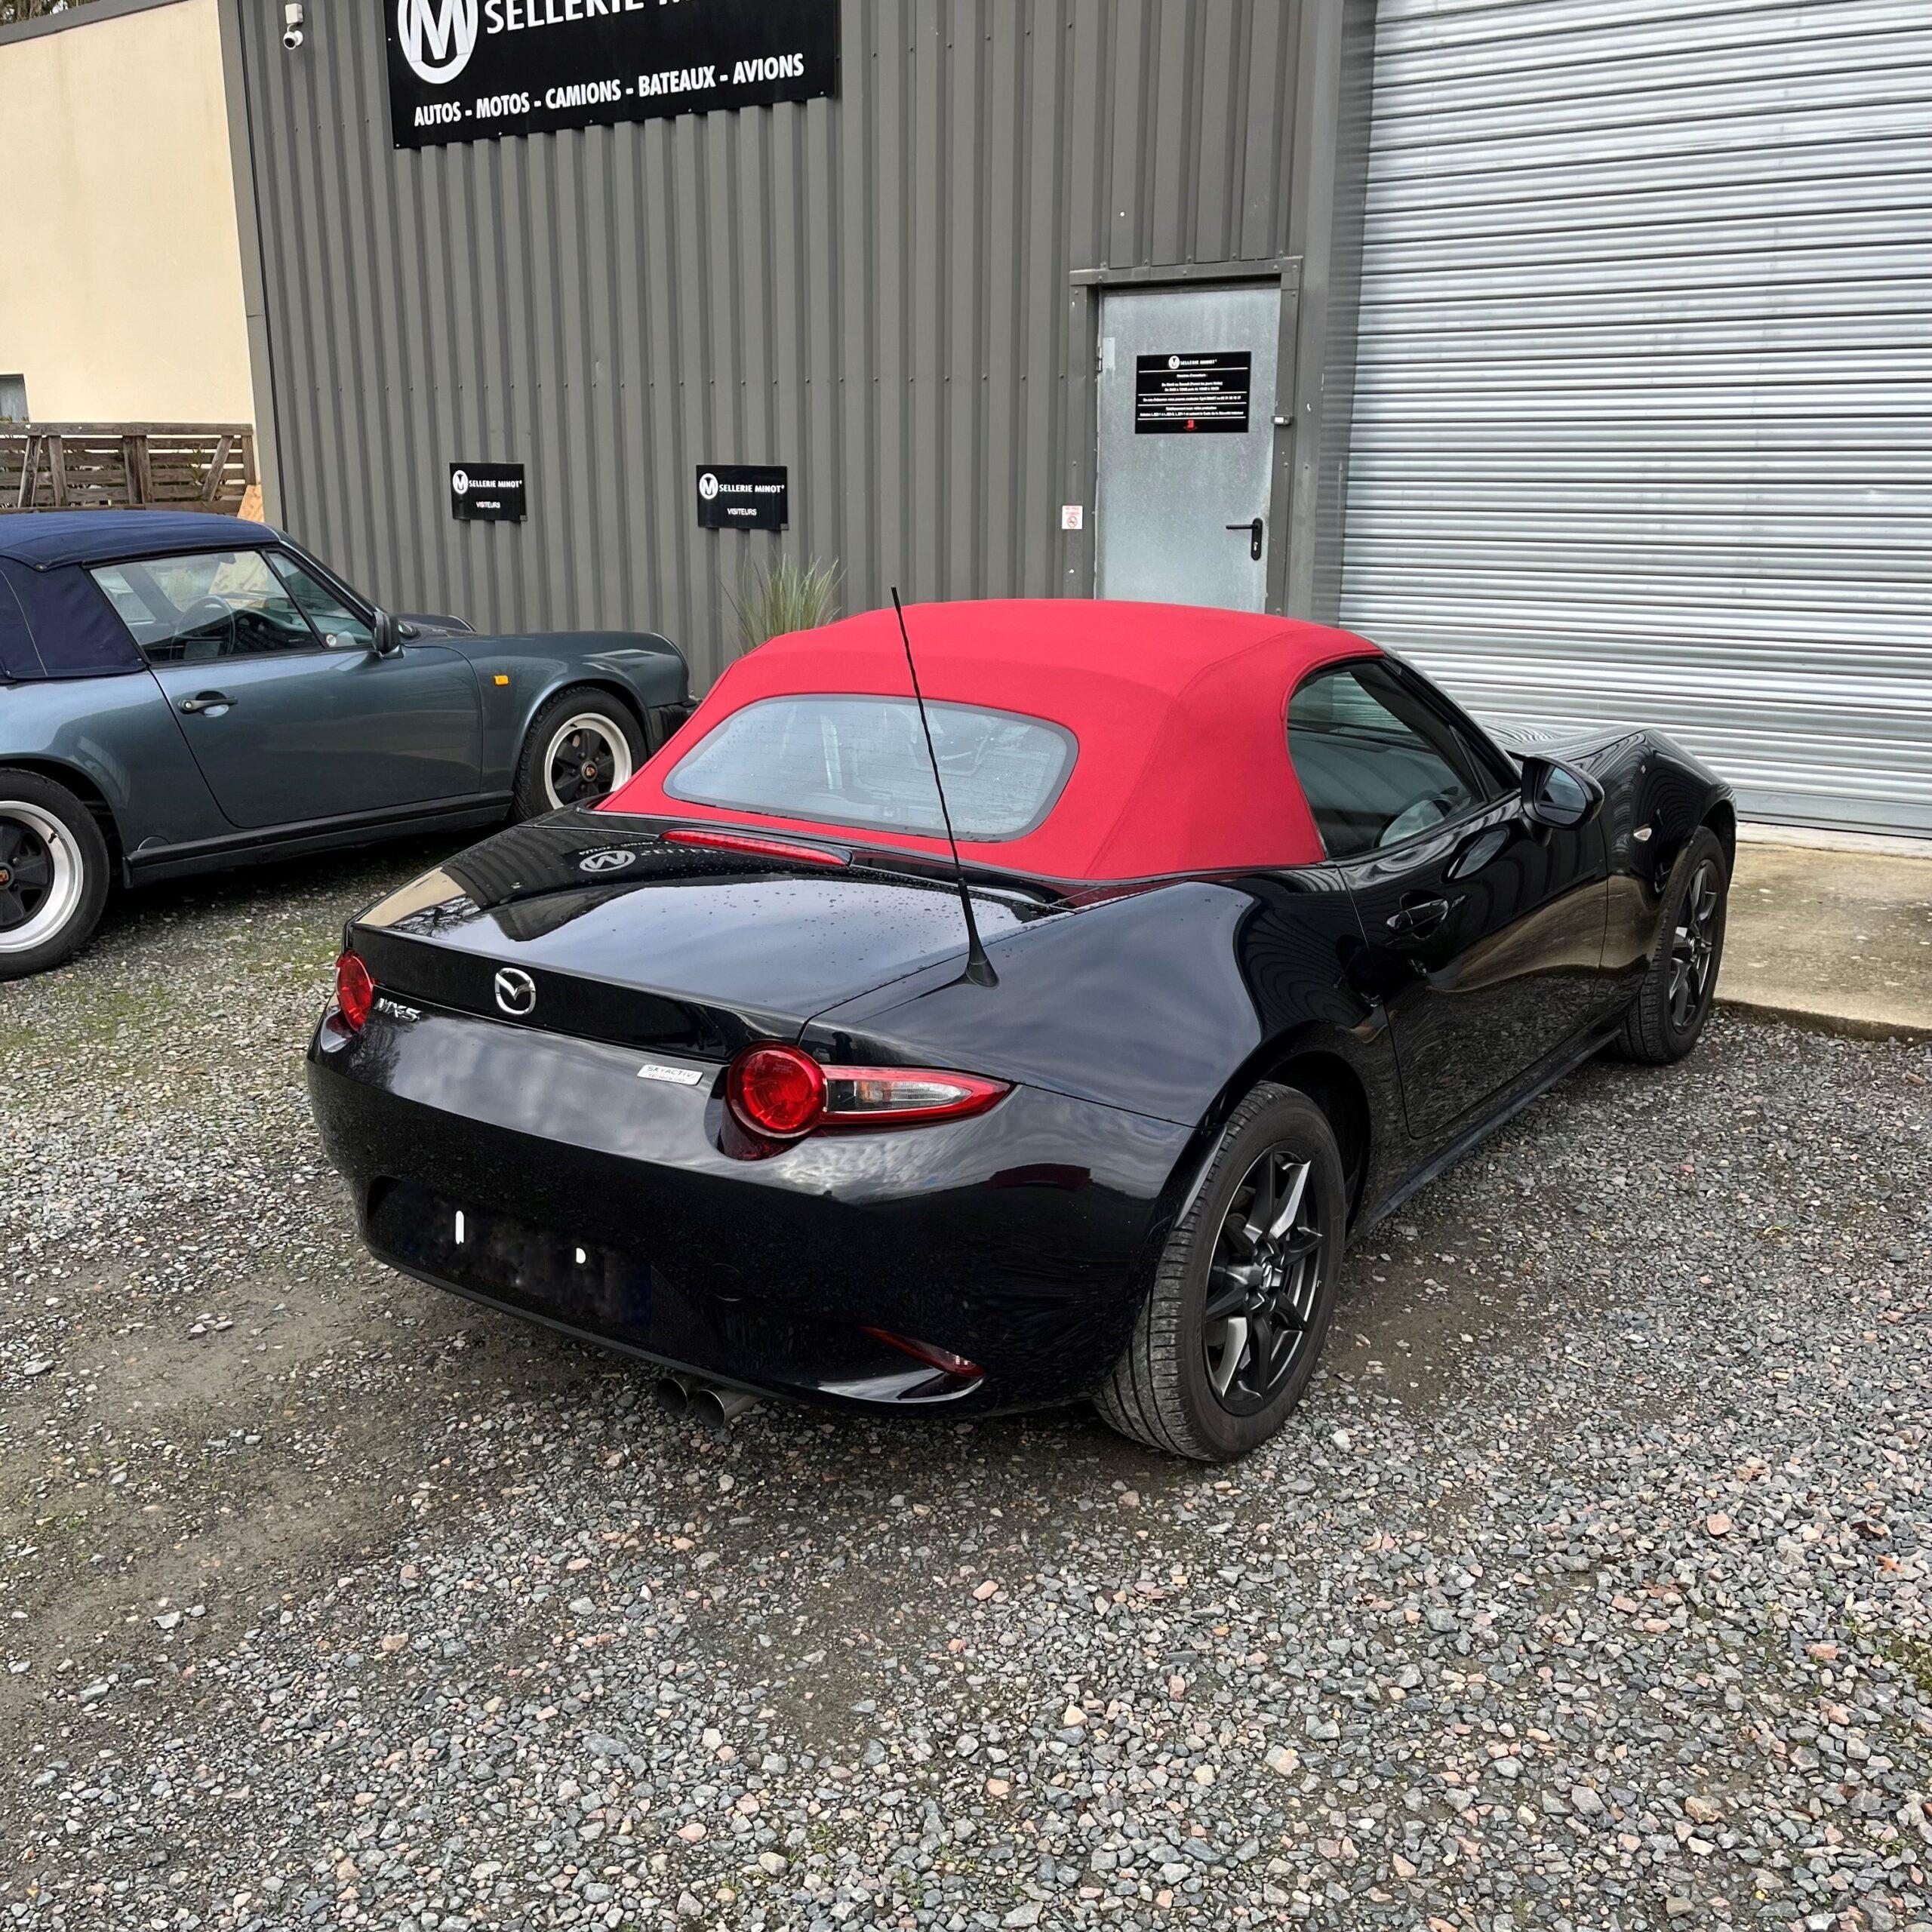 Remplacement capote MAZDA MX5 ND - SELLERIE MINOT